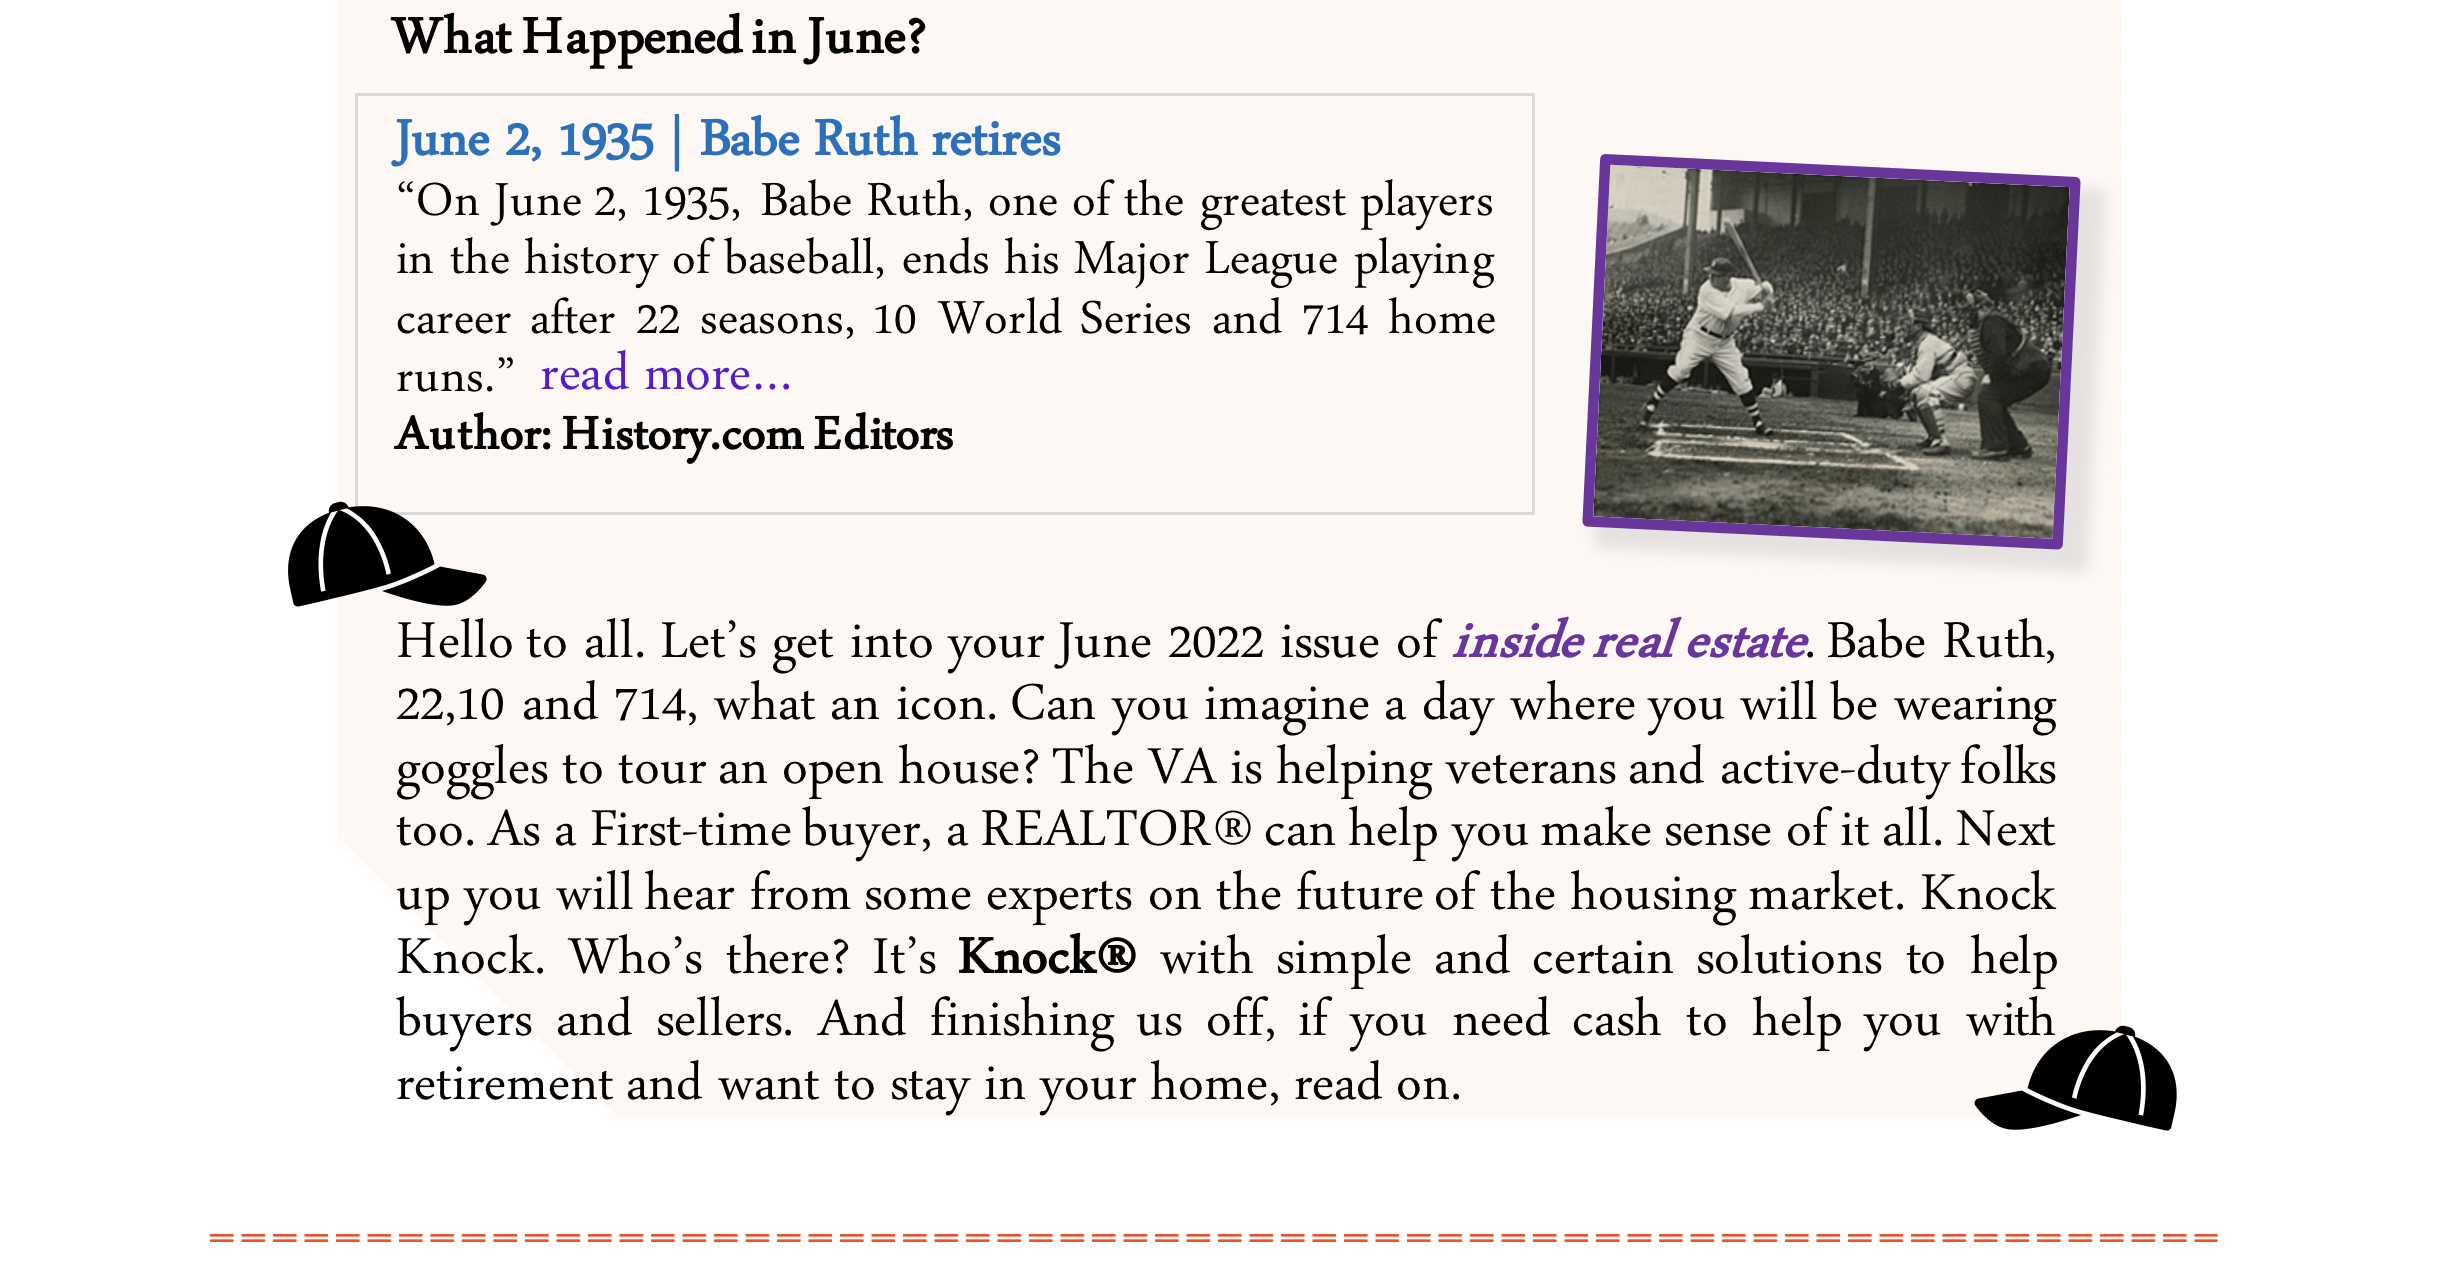 BABE RUTH ARTICLE AND INTRO TO JUNE ISSUE OF IRE